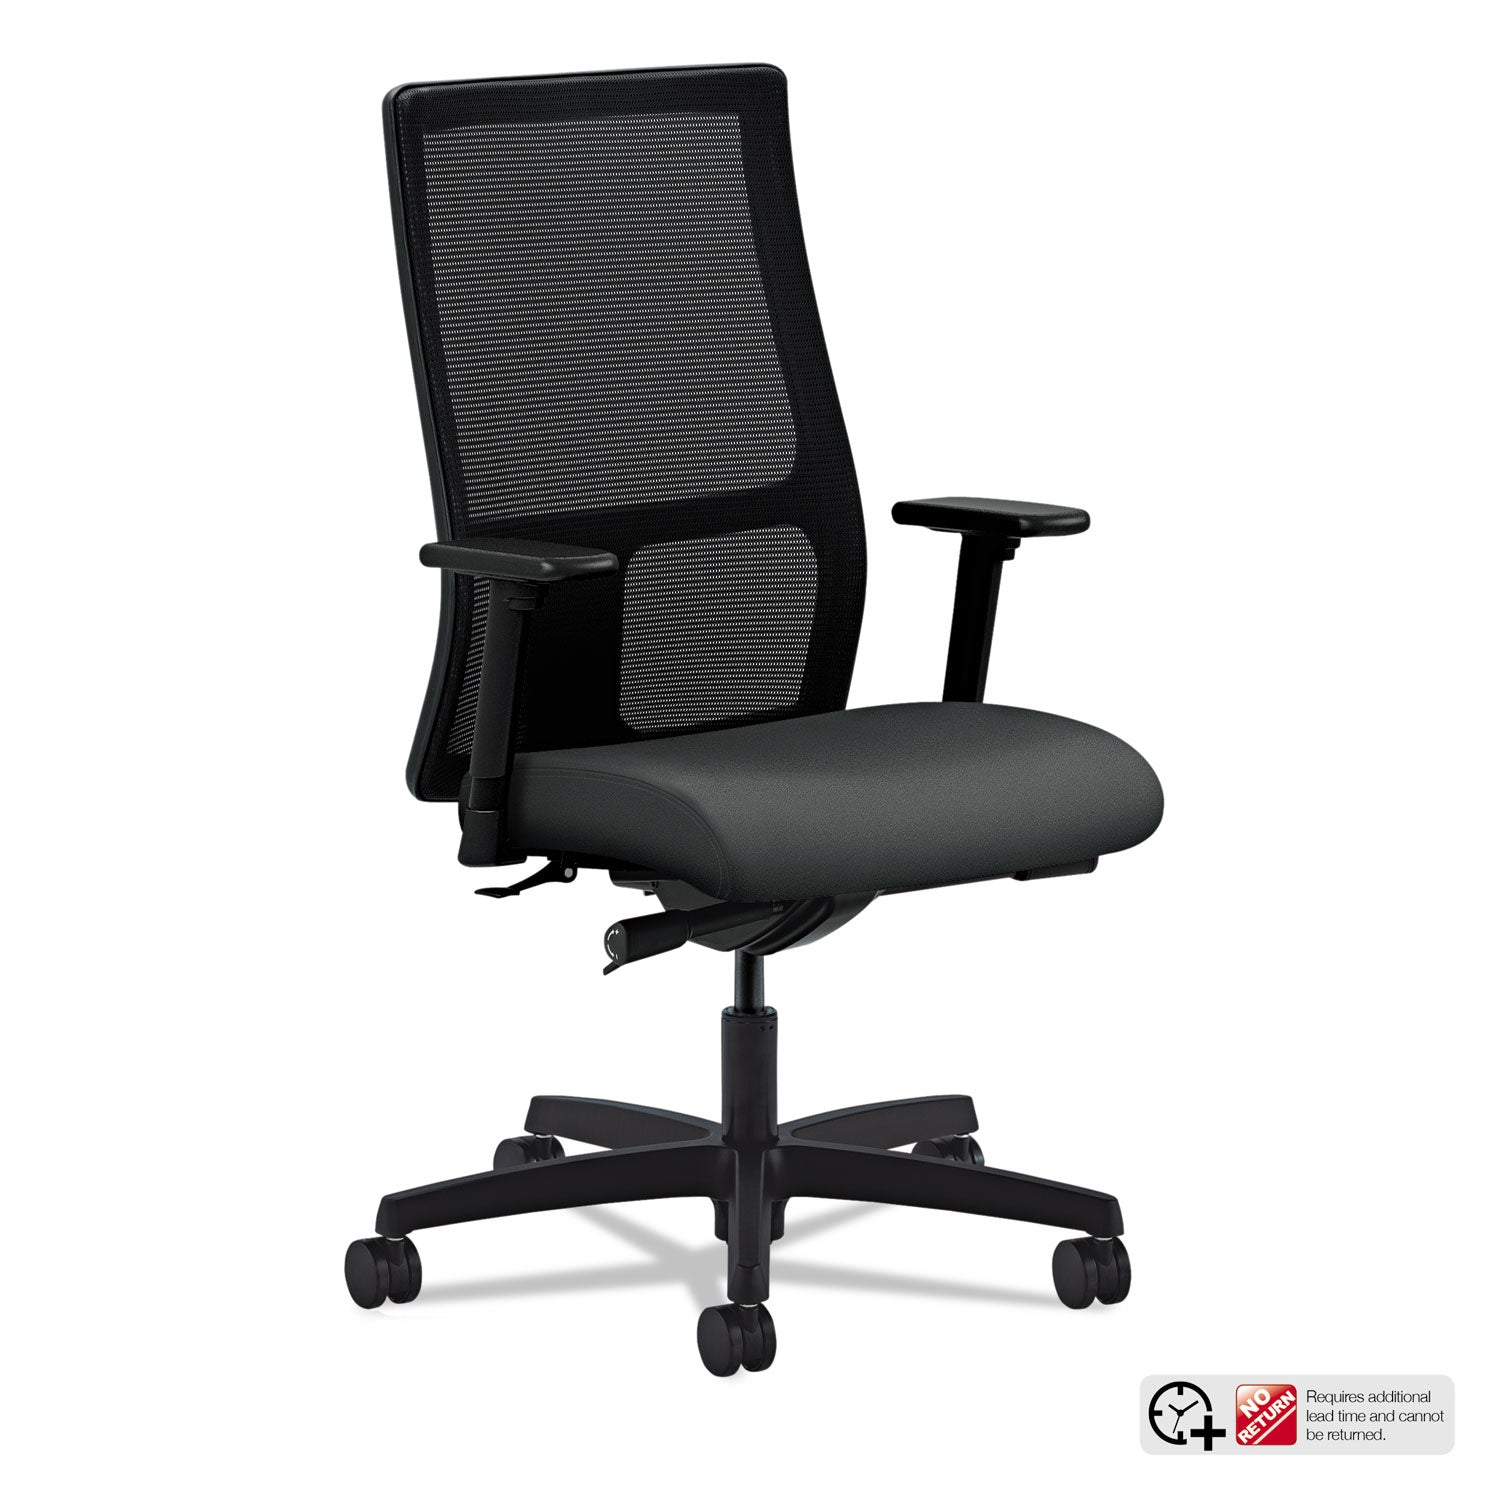 Ignition Series Mesh Mid-Back Work Chair, Supports Up to 300 lb, 17.5" to 22" Seat Height, Iron Ore Seat, Black Back/Base - 